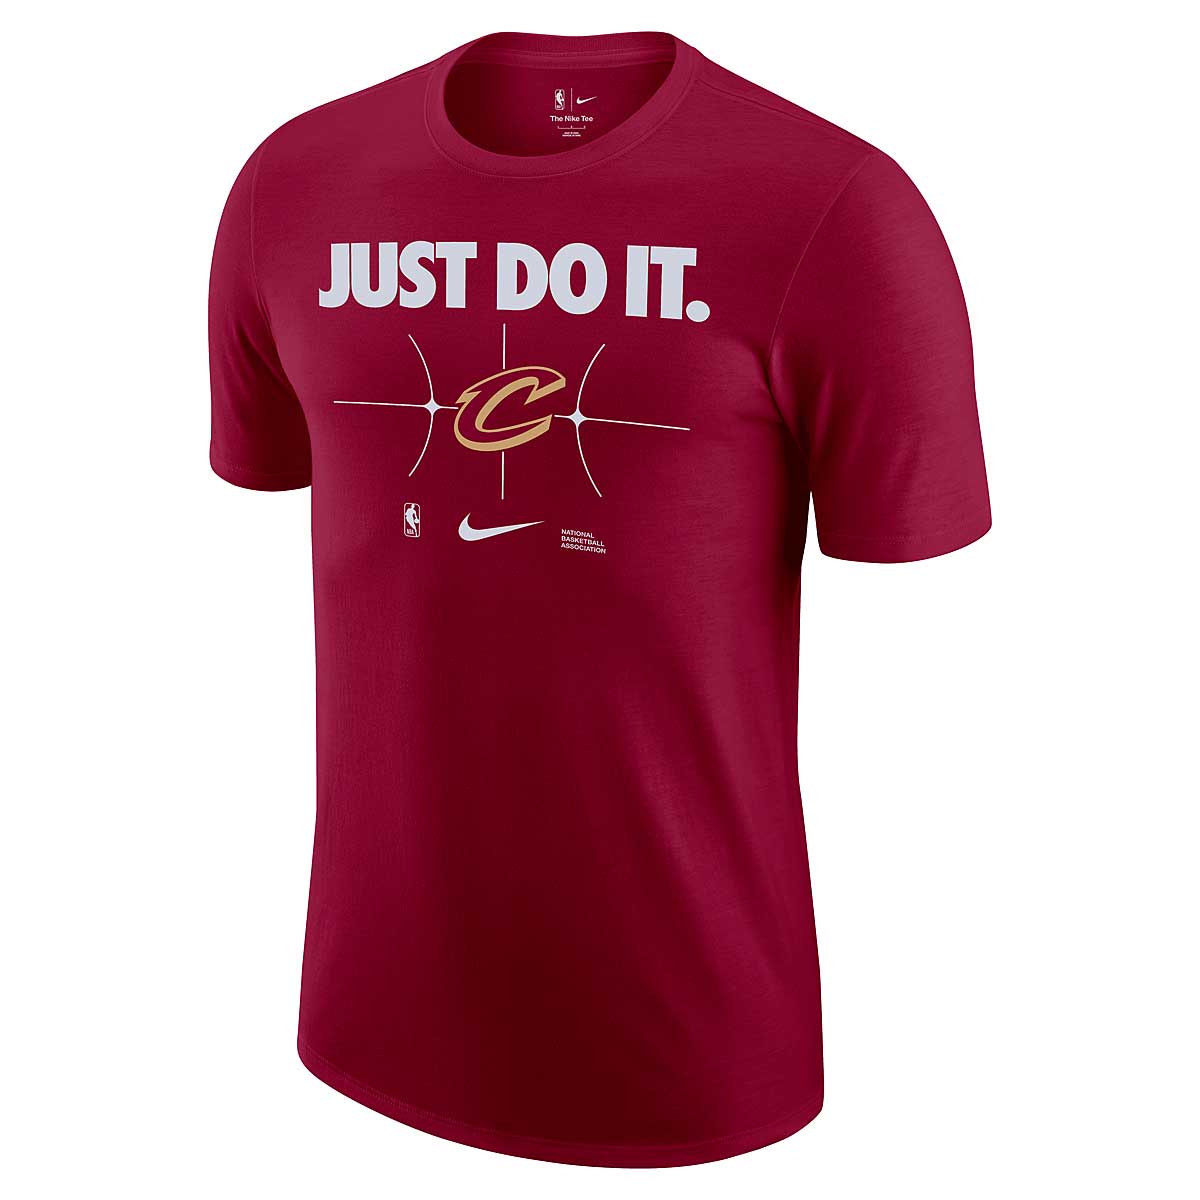 Nike NBA Cleveland Cavaliers Essential Just Do It T-shirt, Team Red L